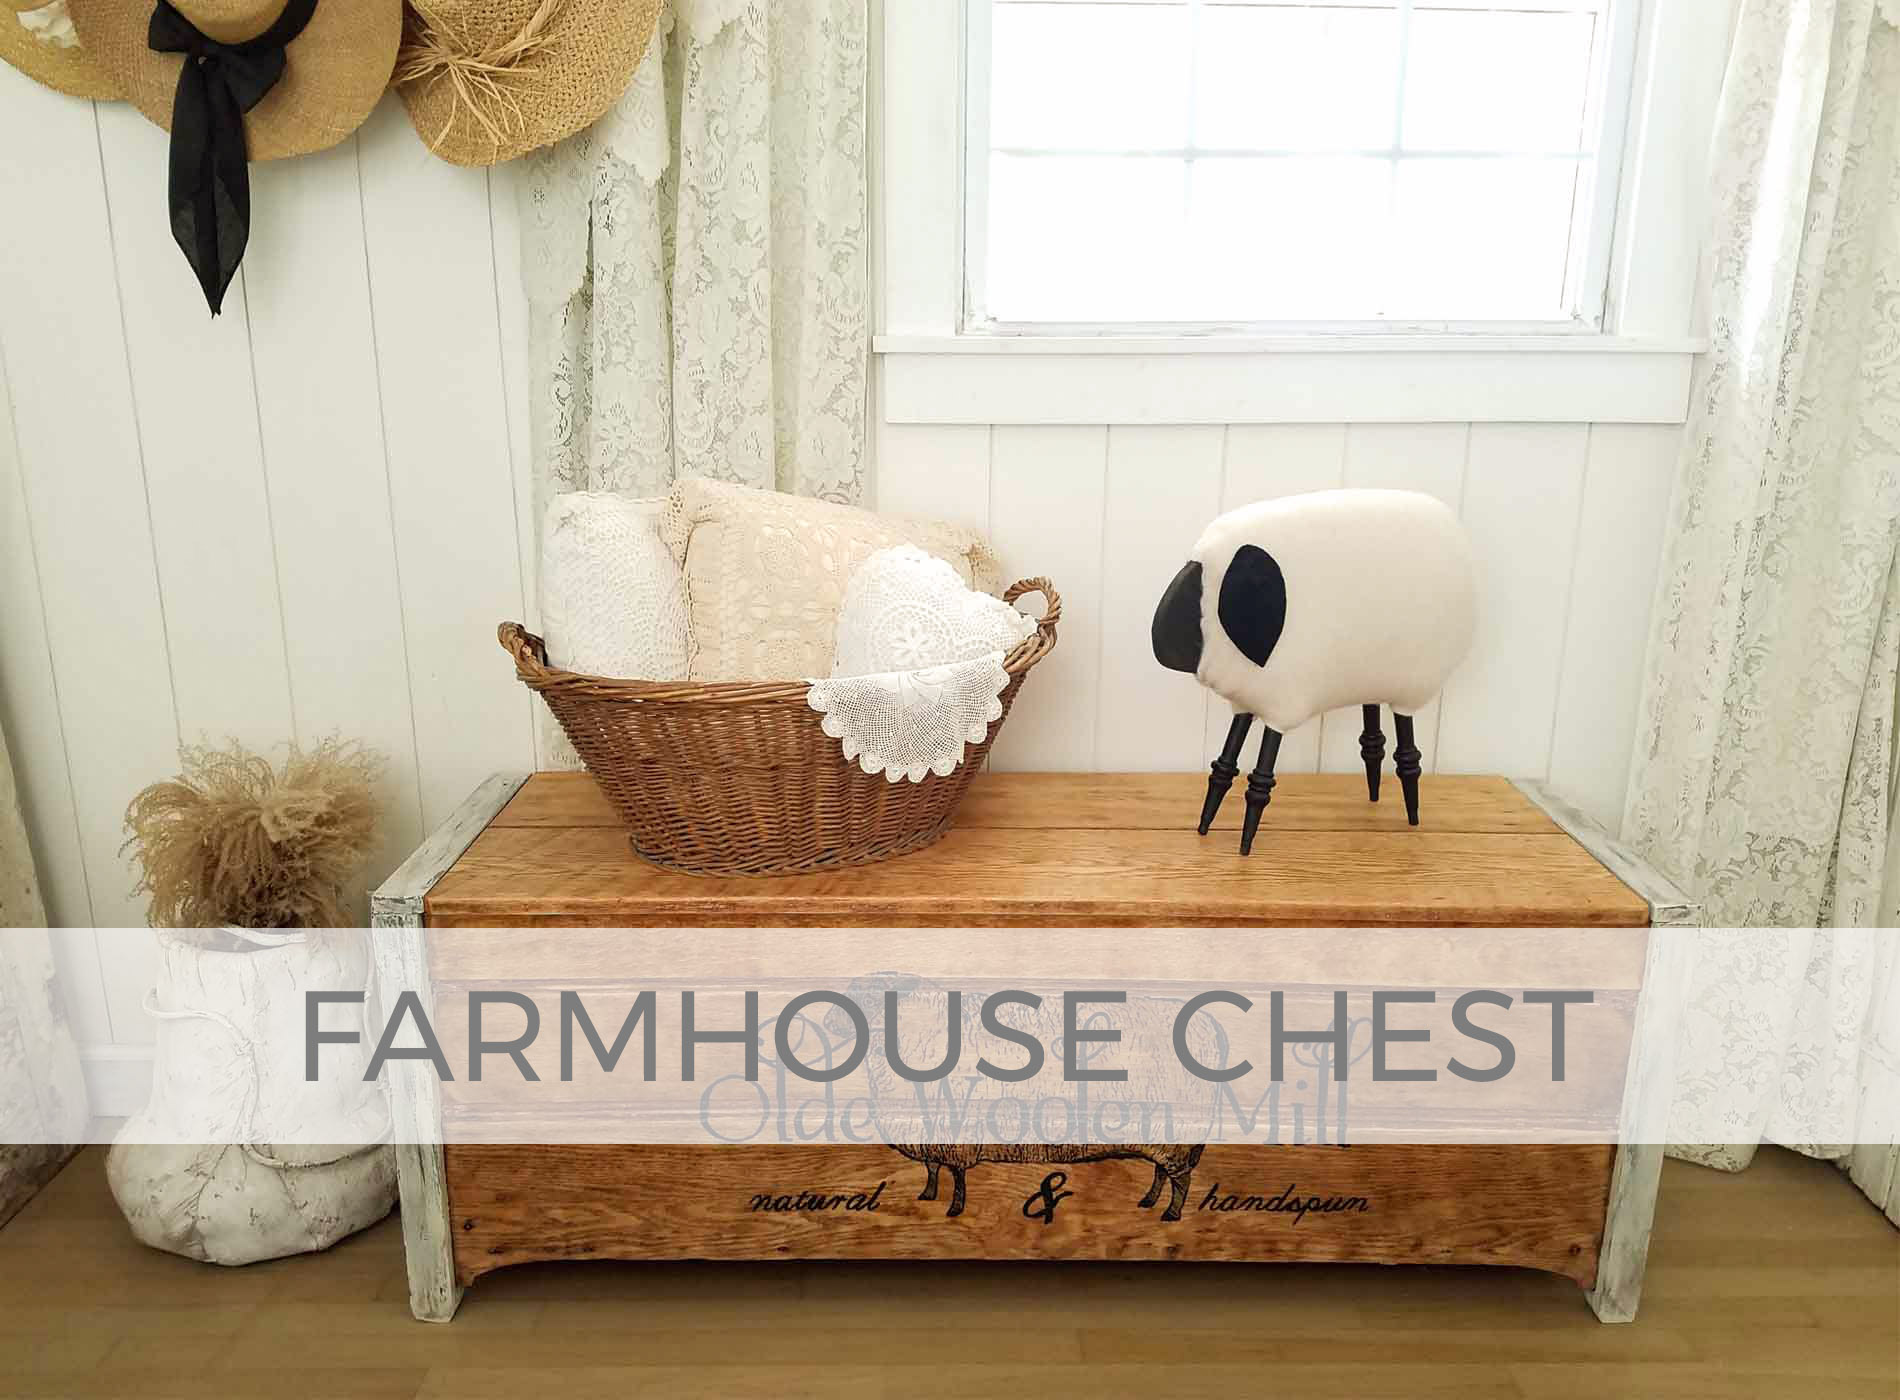 Farmhouse Blanket Chest with Woolen Mill Typography by Larissa of Prodigal Pieces | prodigalpieces.com #prodigalpieces